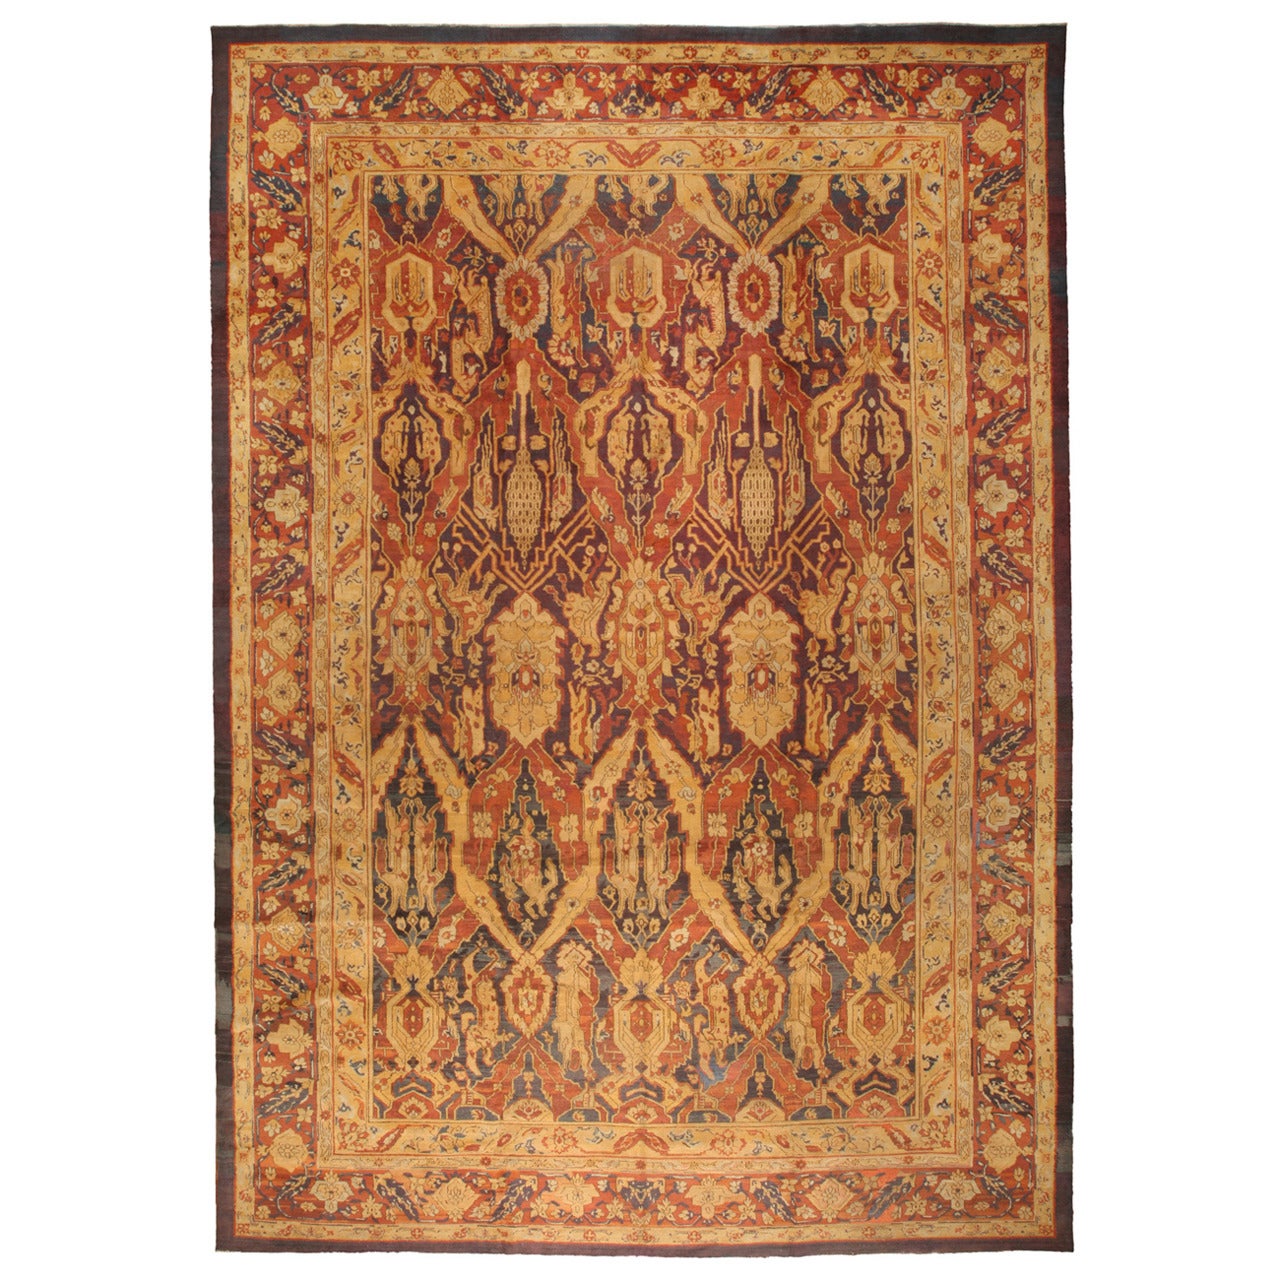 Exceptional Oversize Antique 19th Century Indian Amritsar Carpet For Sale